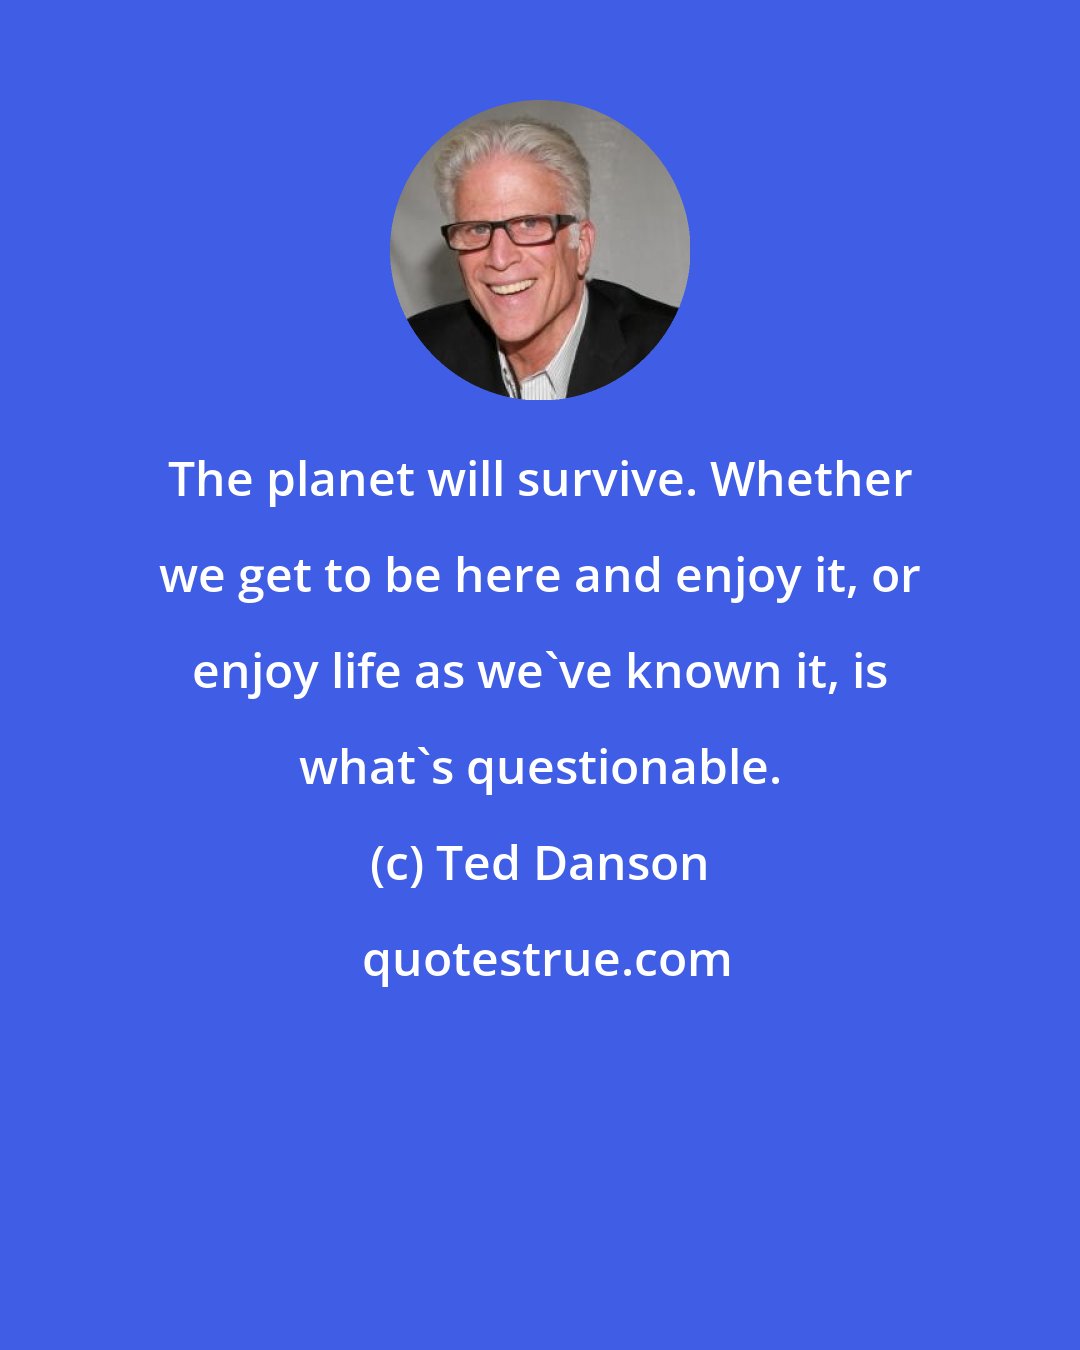 Ted Danson: The planet will survive. Whether we get to be here and enjoy it, or enjoy life as we've known it, is what's questionable.